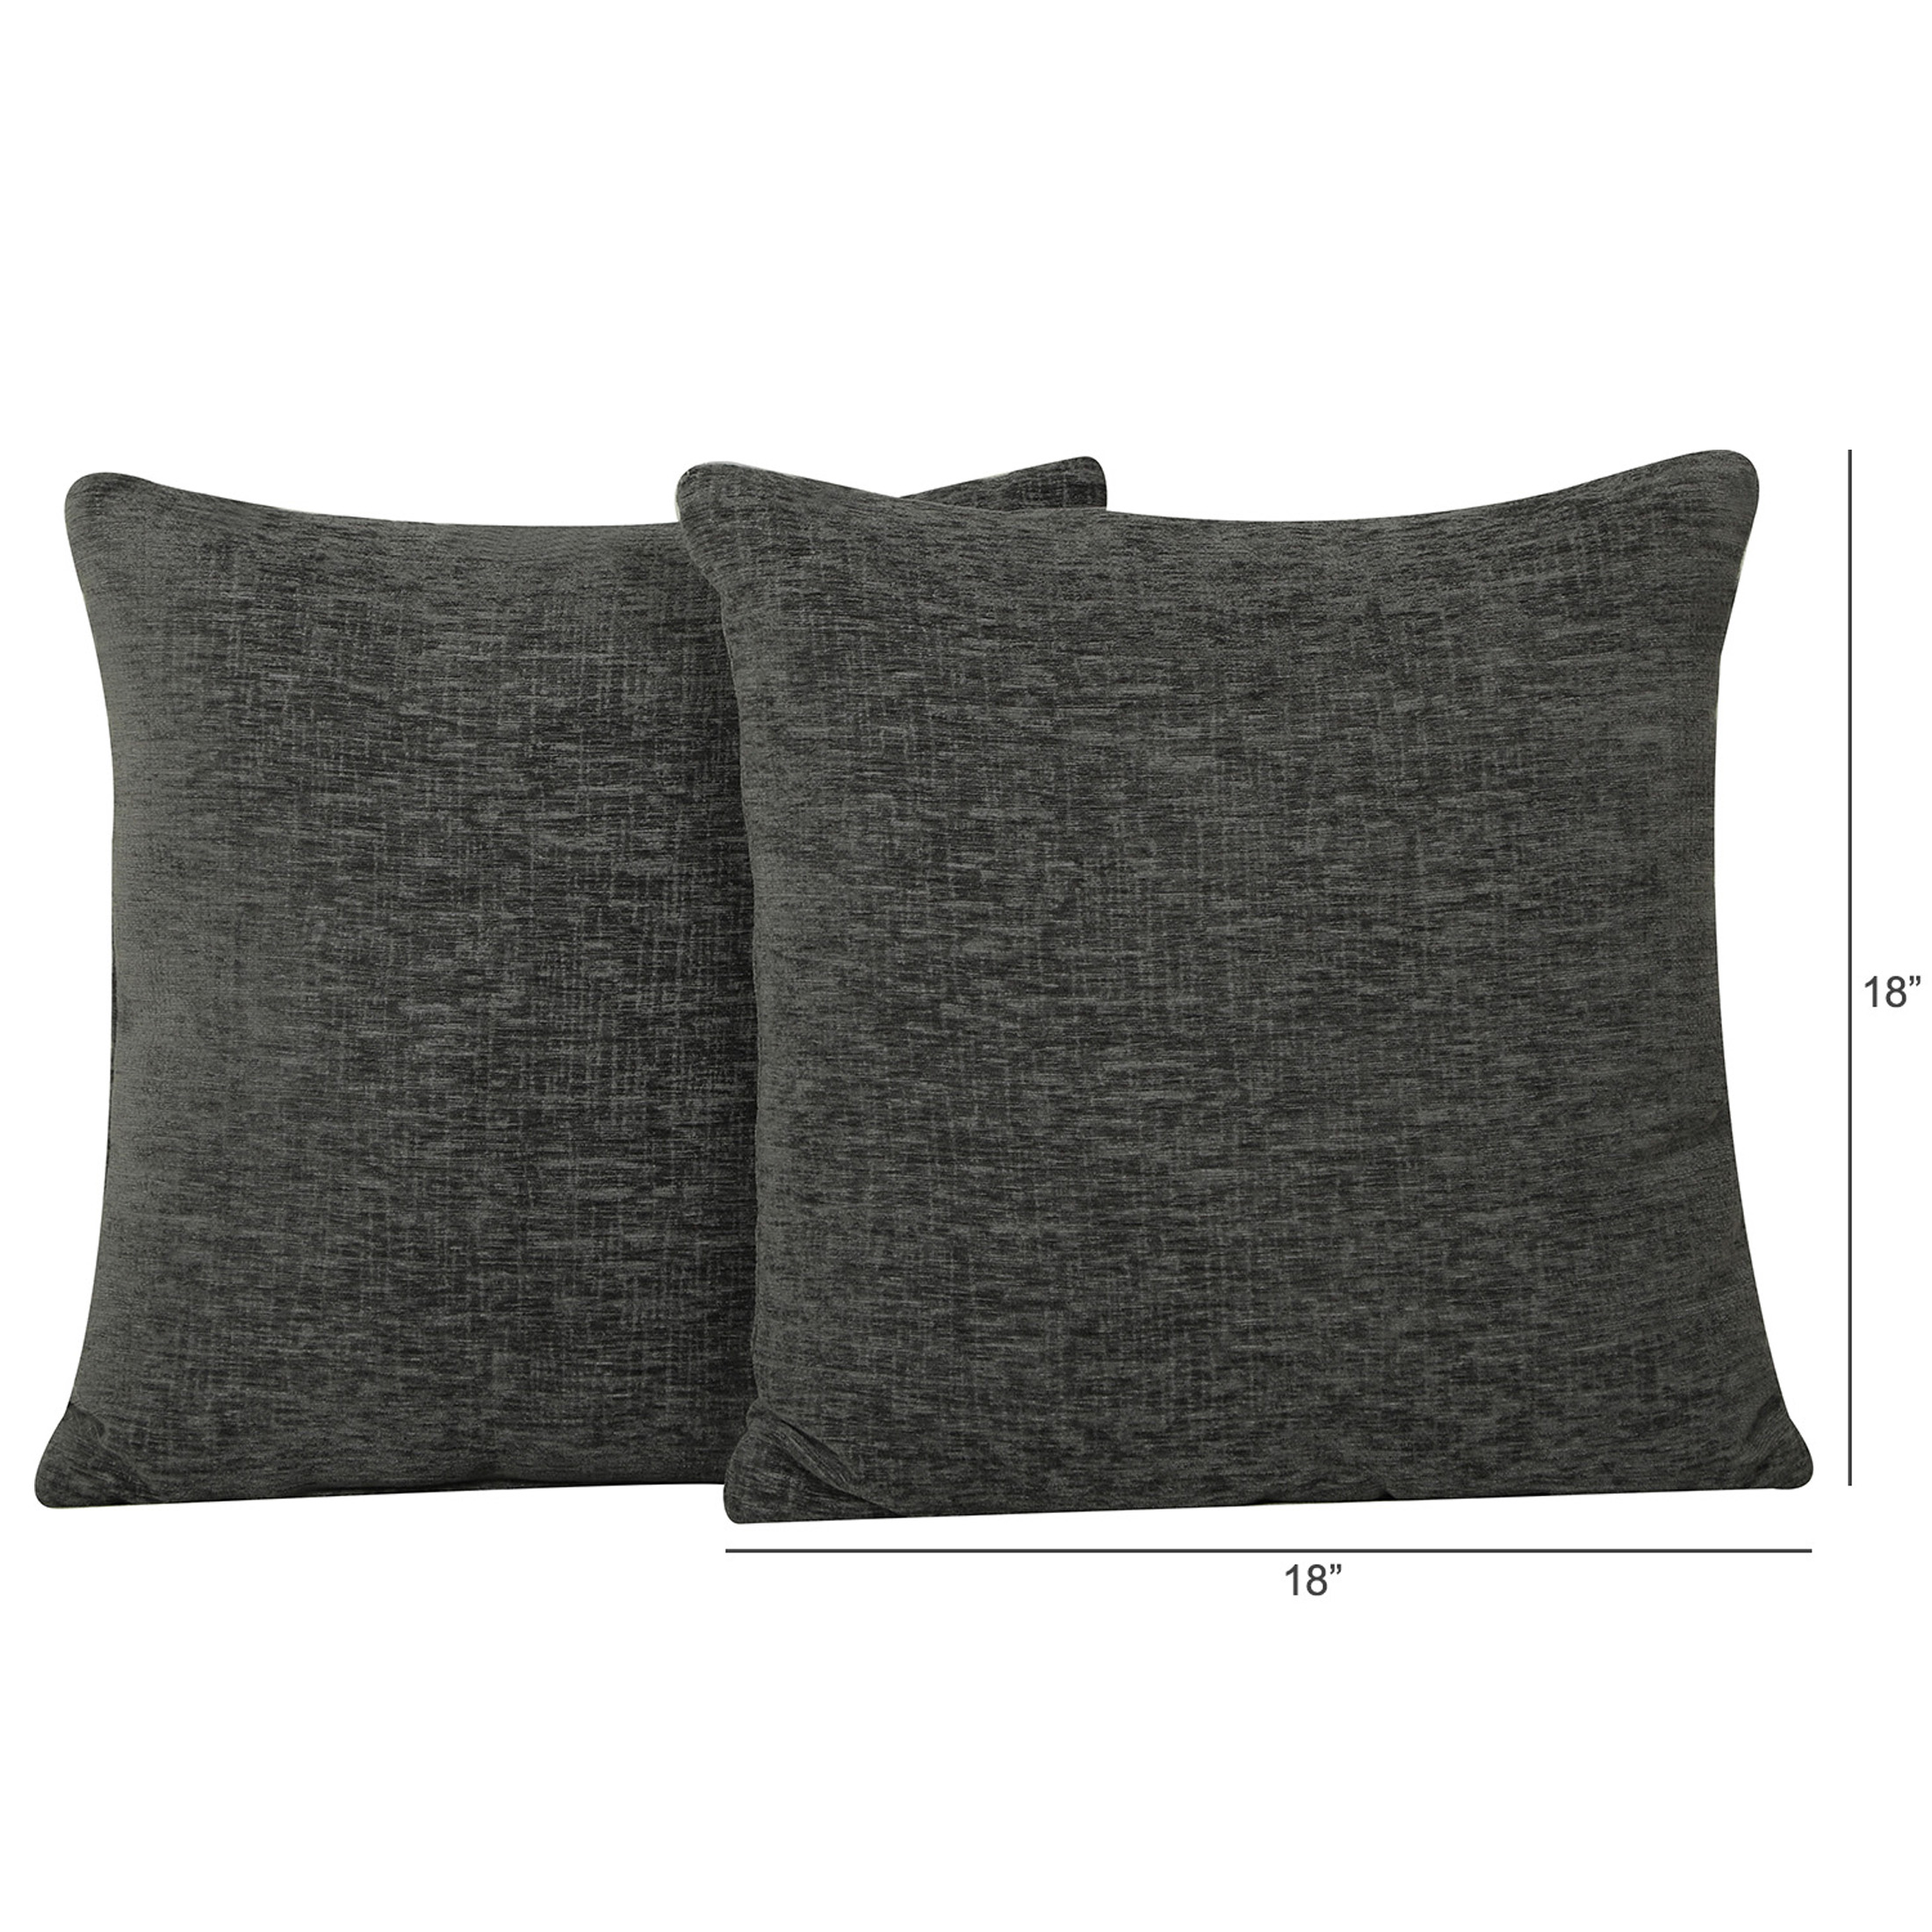 Mainstays Chenille Square Grey Pillow 18''x18'', 2 Pack - image 4 of 5